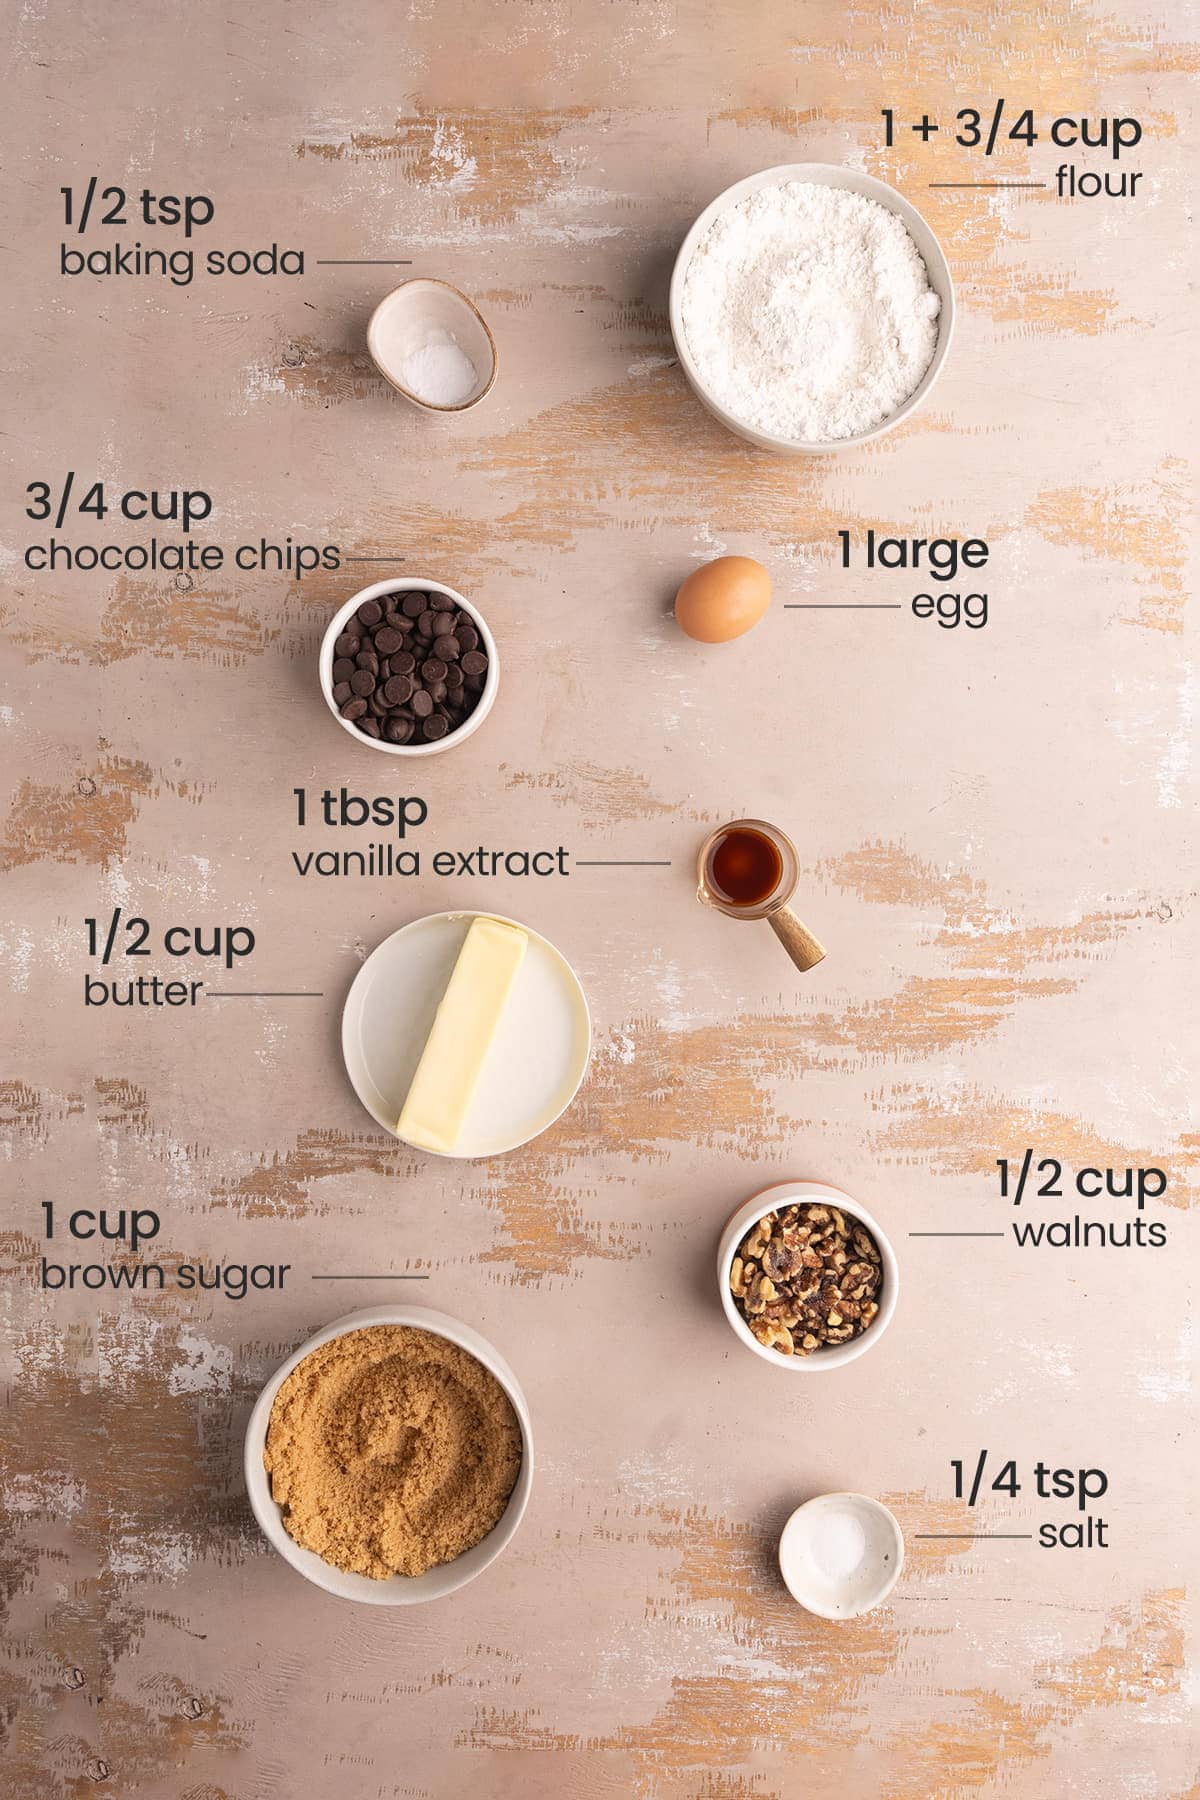 All ingredients needed for Chocolate Chip Walnut Cookies including flour, baking soda, egg, chocolate chips, vanilla extract, butter, walnut, brown sugar, and salt